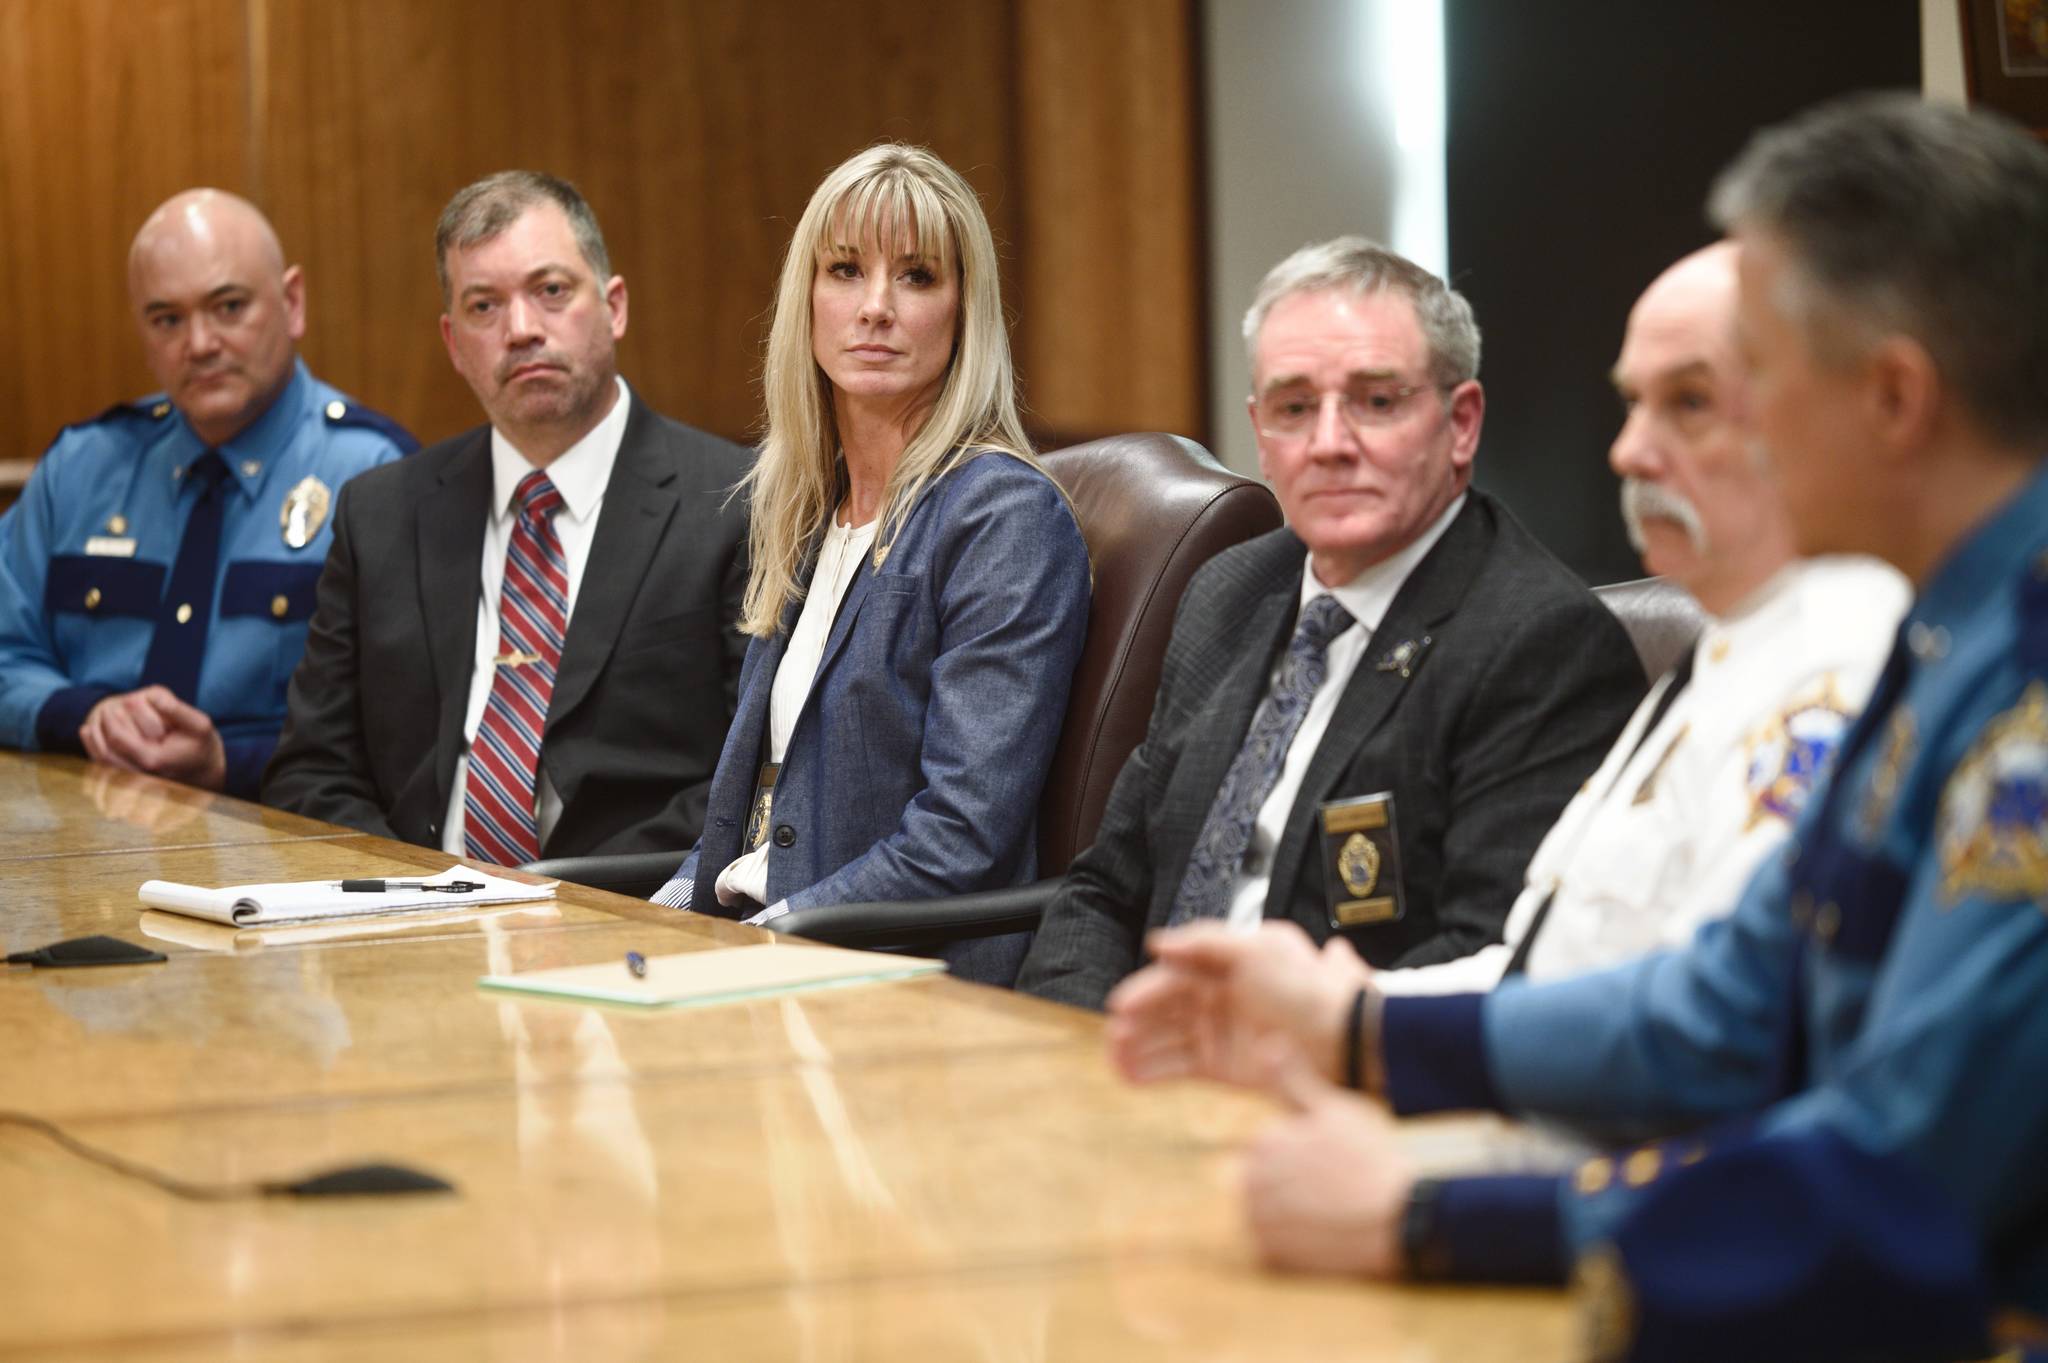 Amanda Price, Commissioner of the Department of Public Safety, center, is surrounded by Department of Public Safety officials during a press conference on her confirmation to the position at the Capitol on Tuesday, April 16, 2019. (Michael Penn / Juneau Empire File)